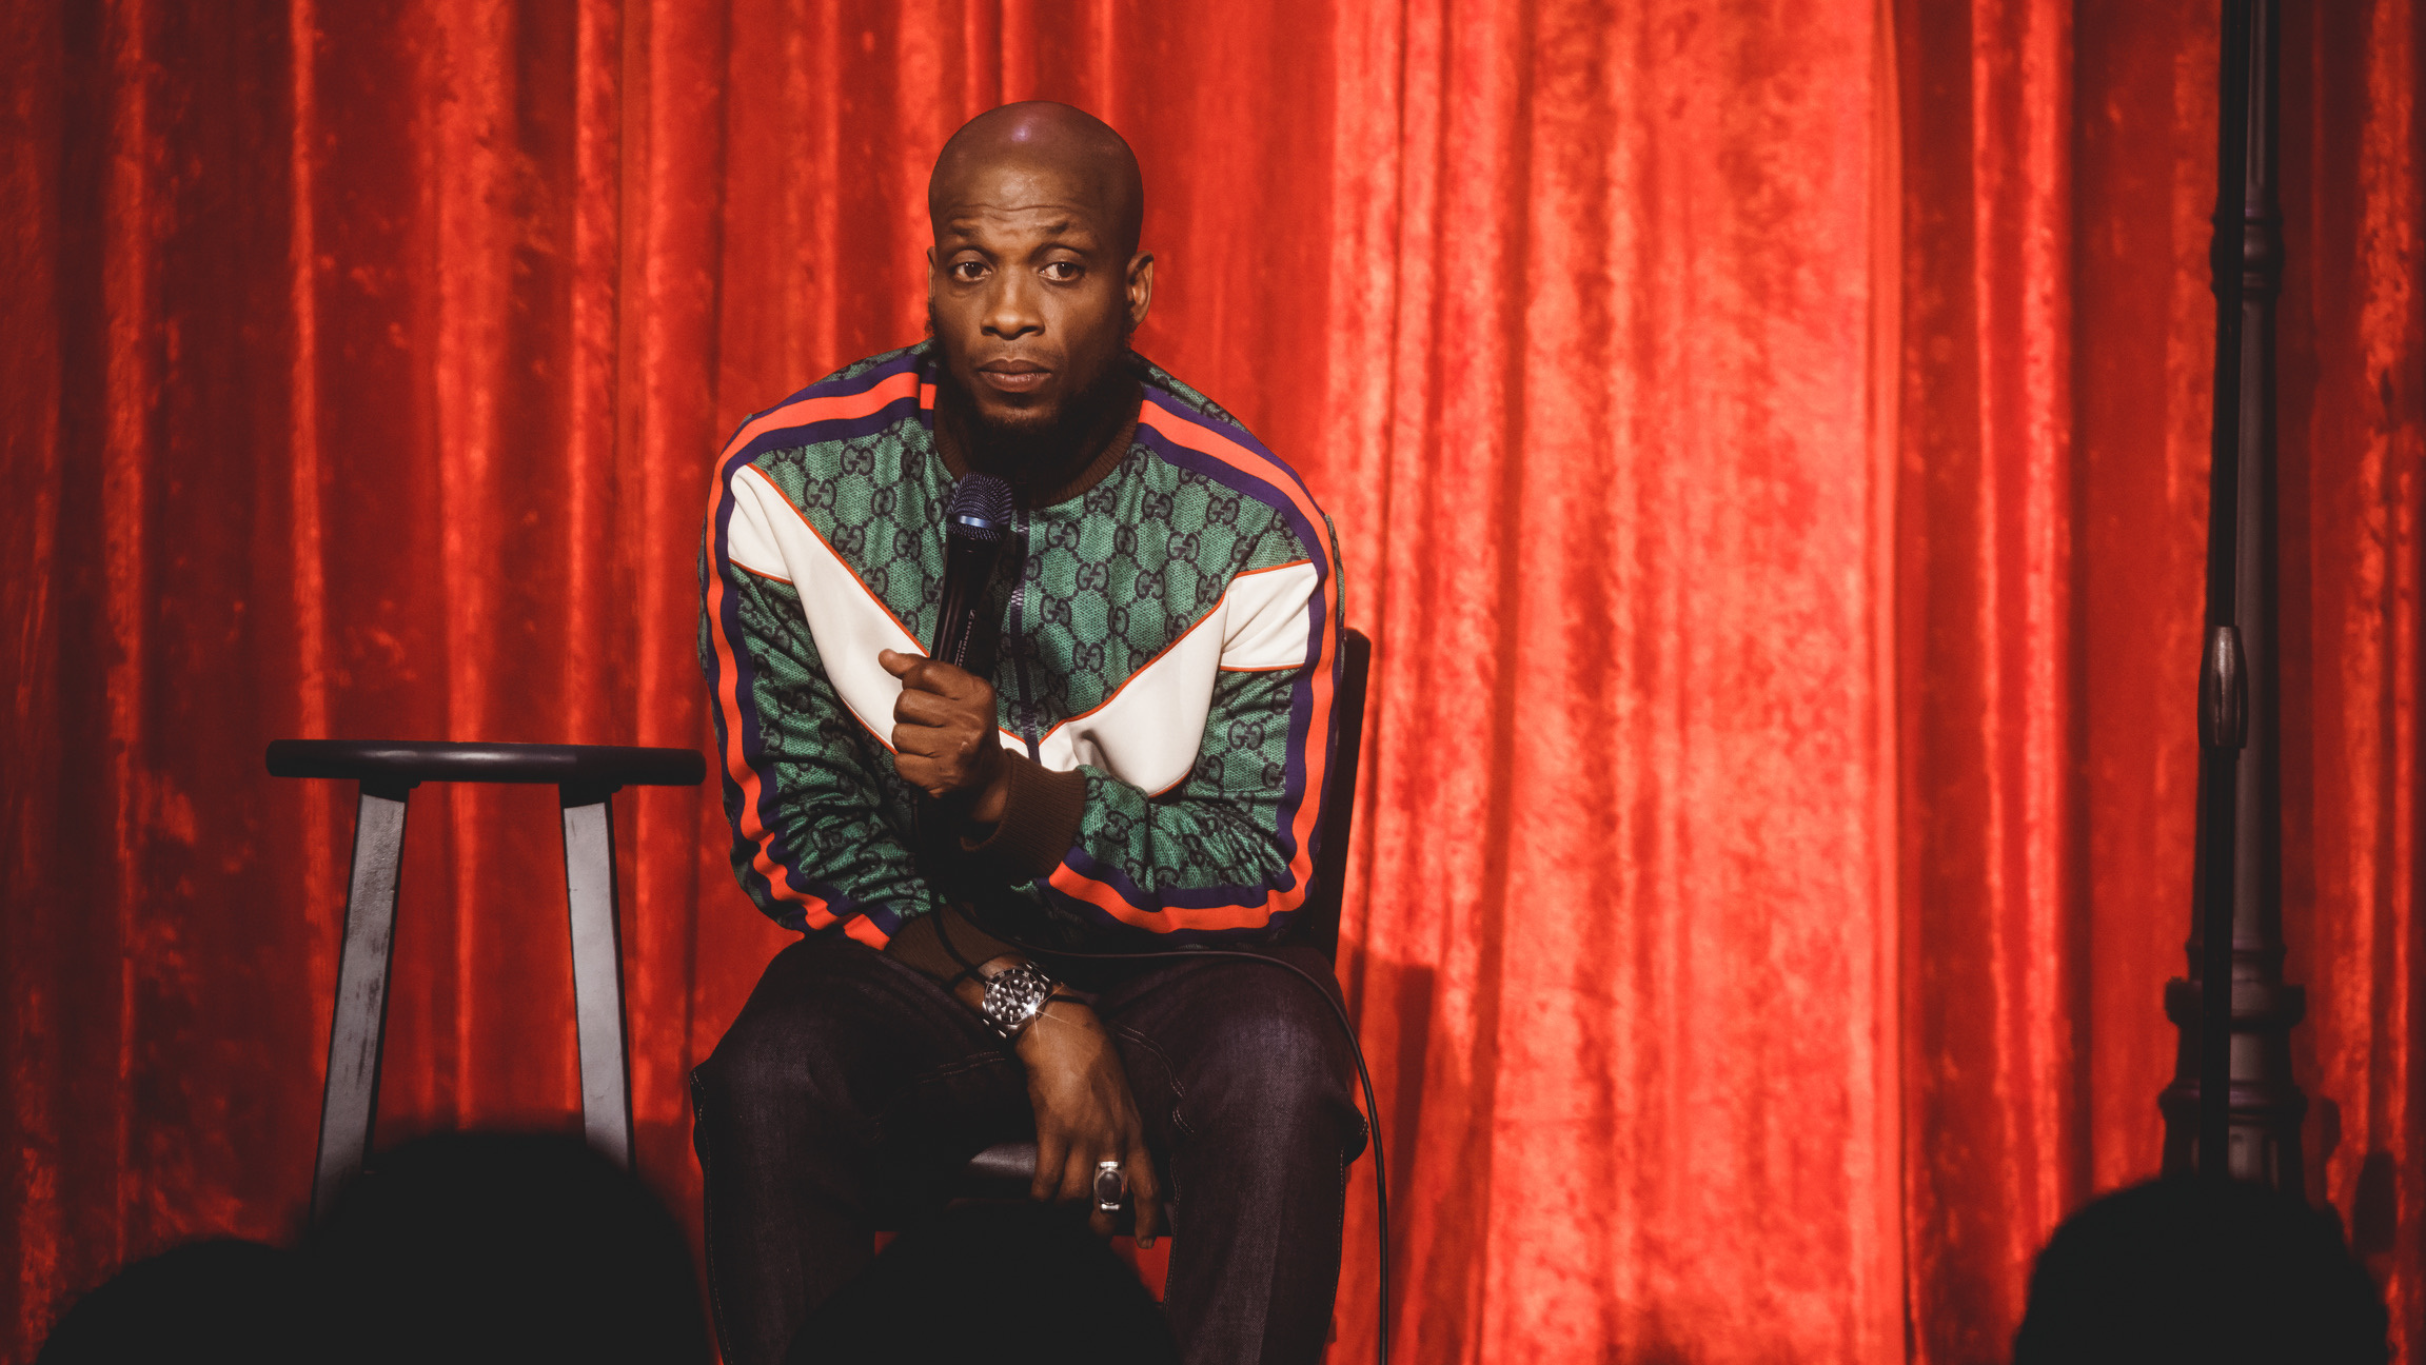 Ali Siddiq: I Got A Story To tell free presale code for early tickets in Oakland